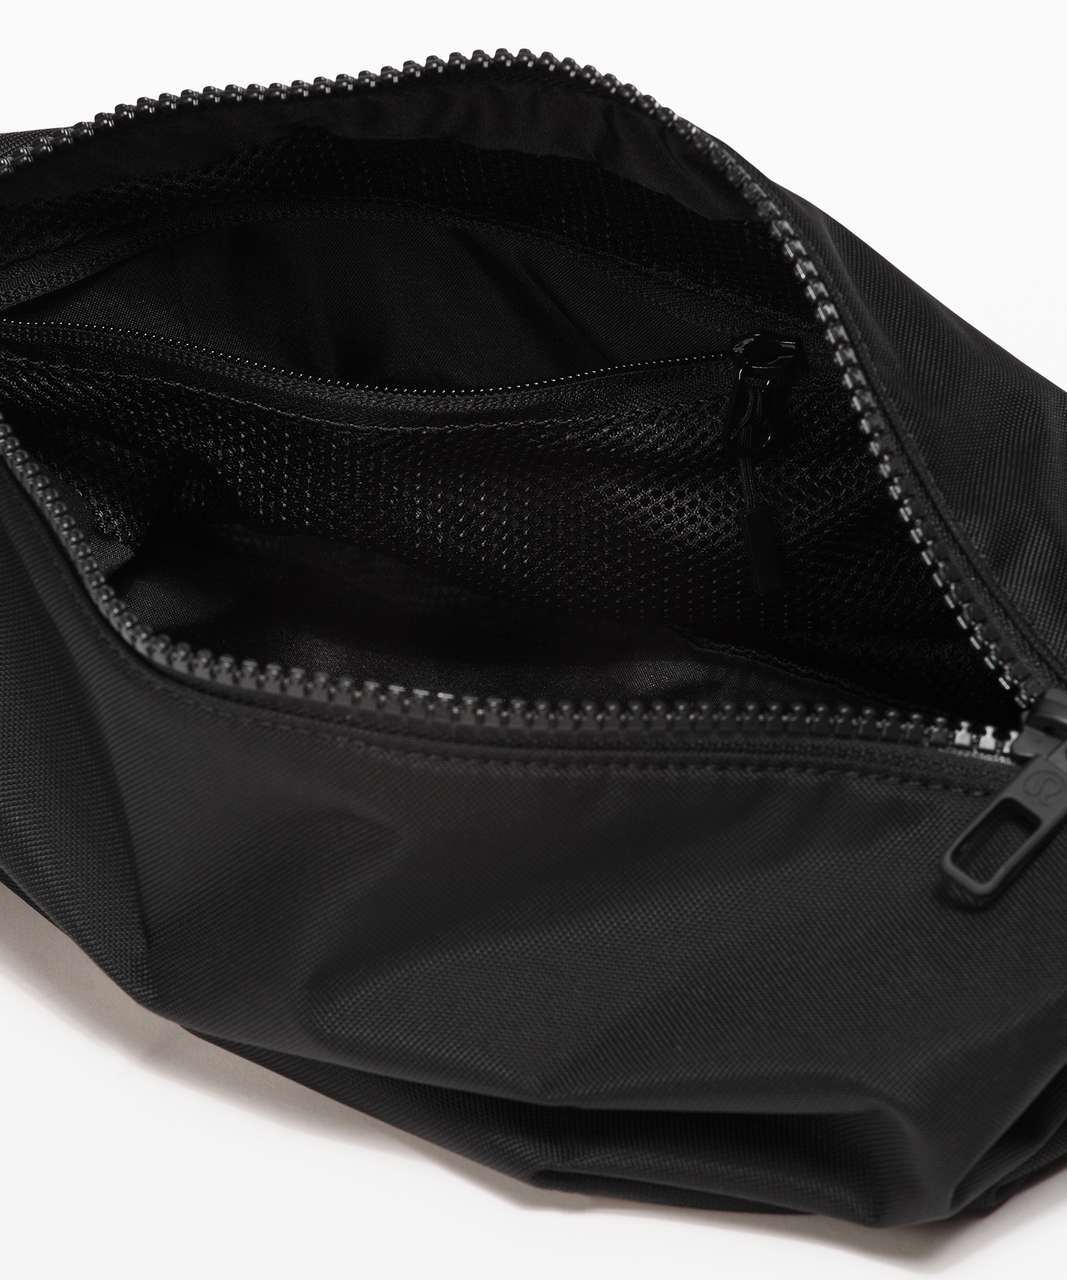 Lululemon Command The Day Kit *5L - Black (Fourth Release)